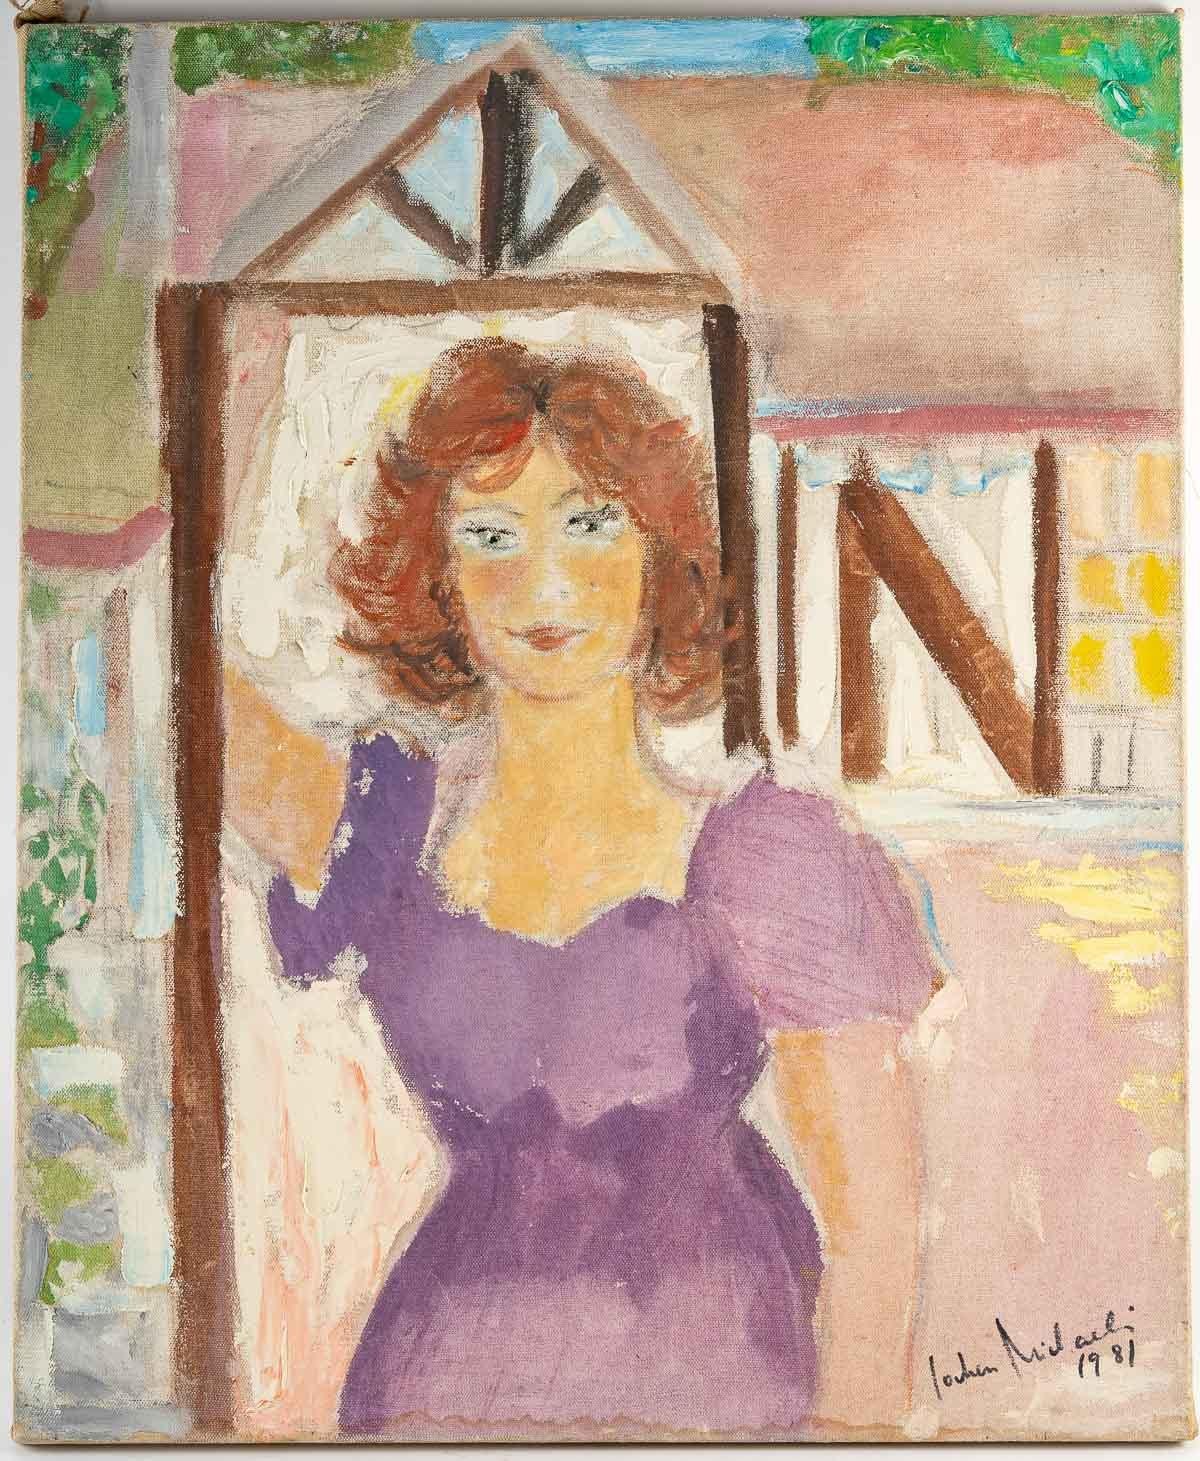 Painting of a woman, 20th century
Painting, oil on canvas, signed and dated 1981, depicting a young woman in spring attire.
Measures: H: 73 cm, W: 60 cm, D: 2 cm.